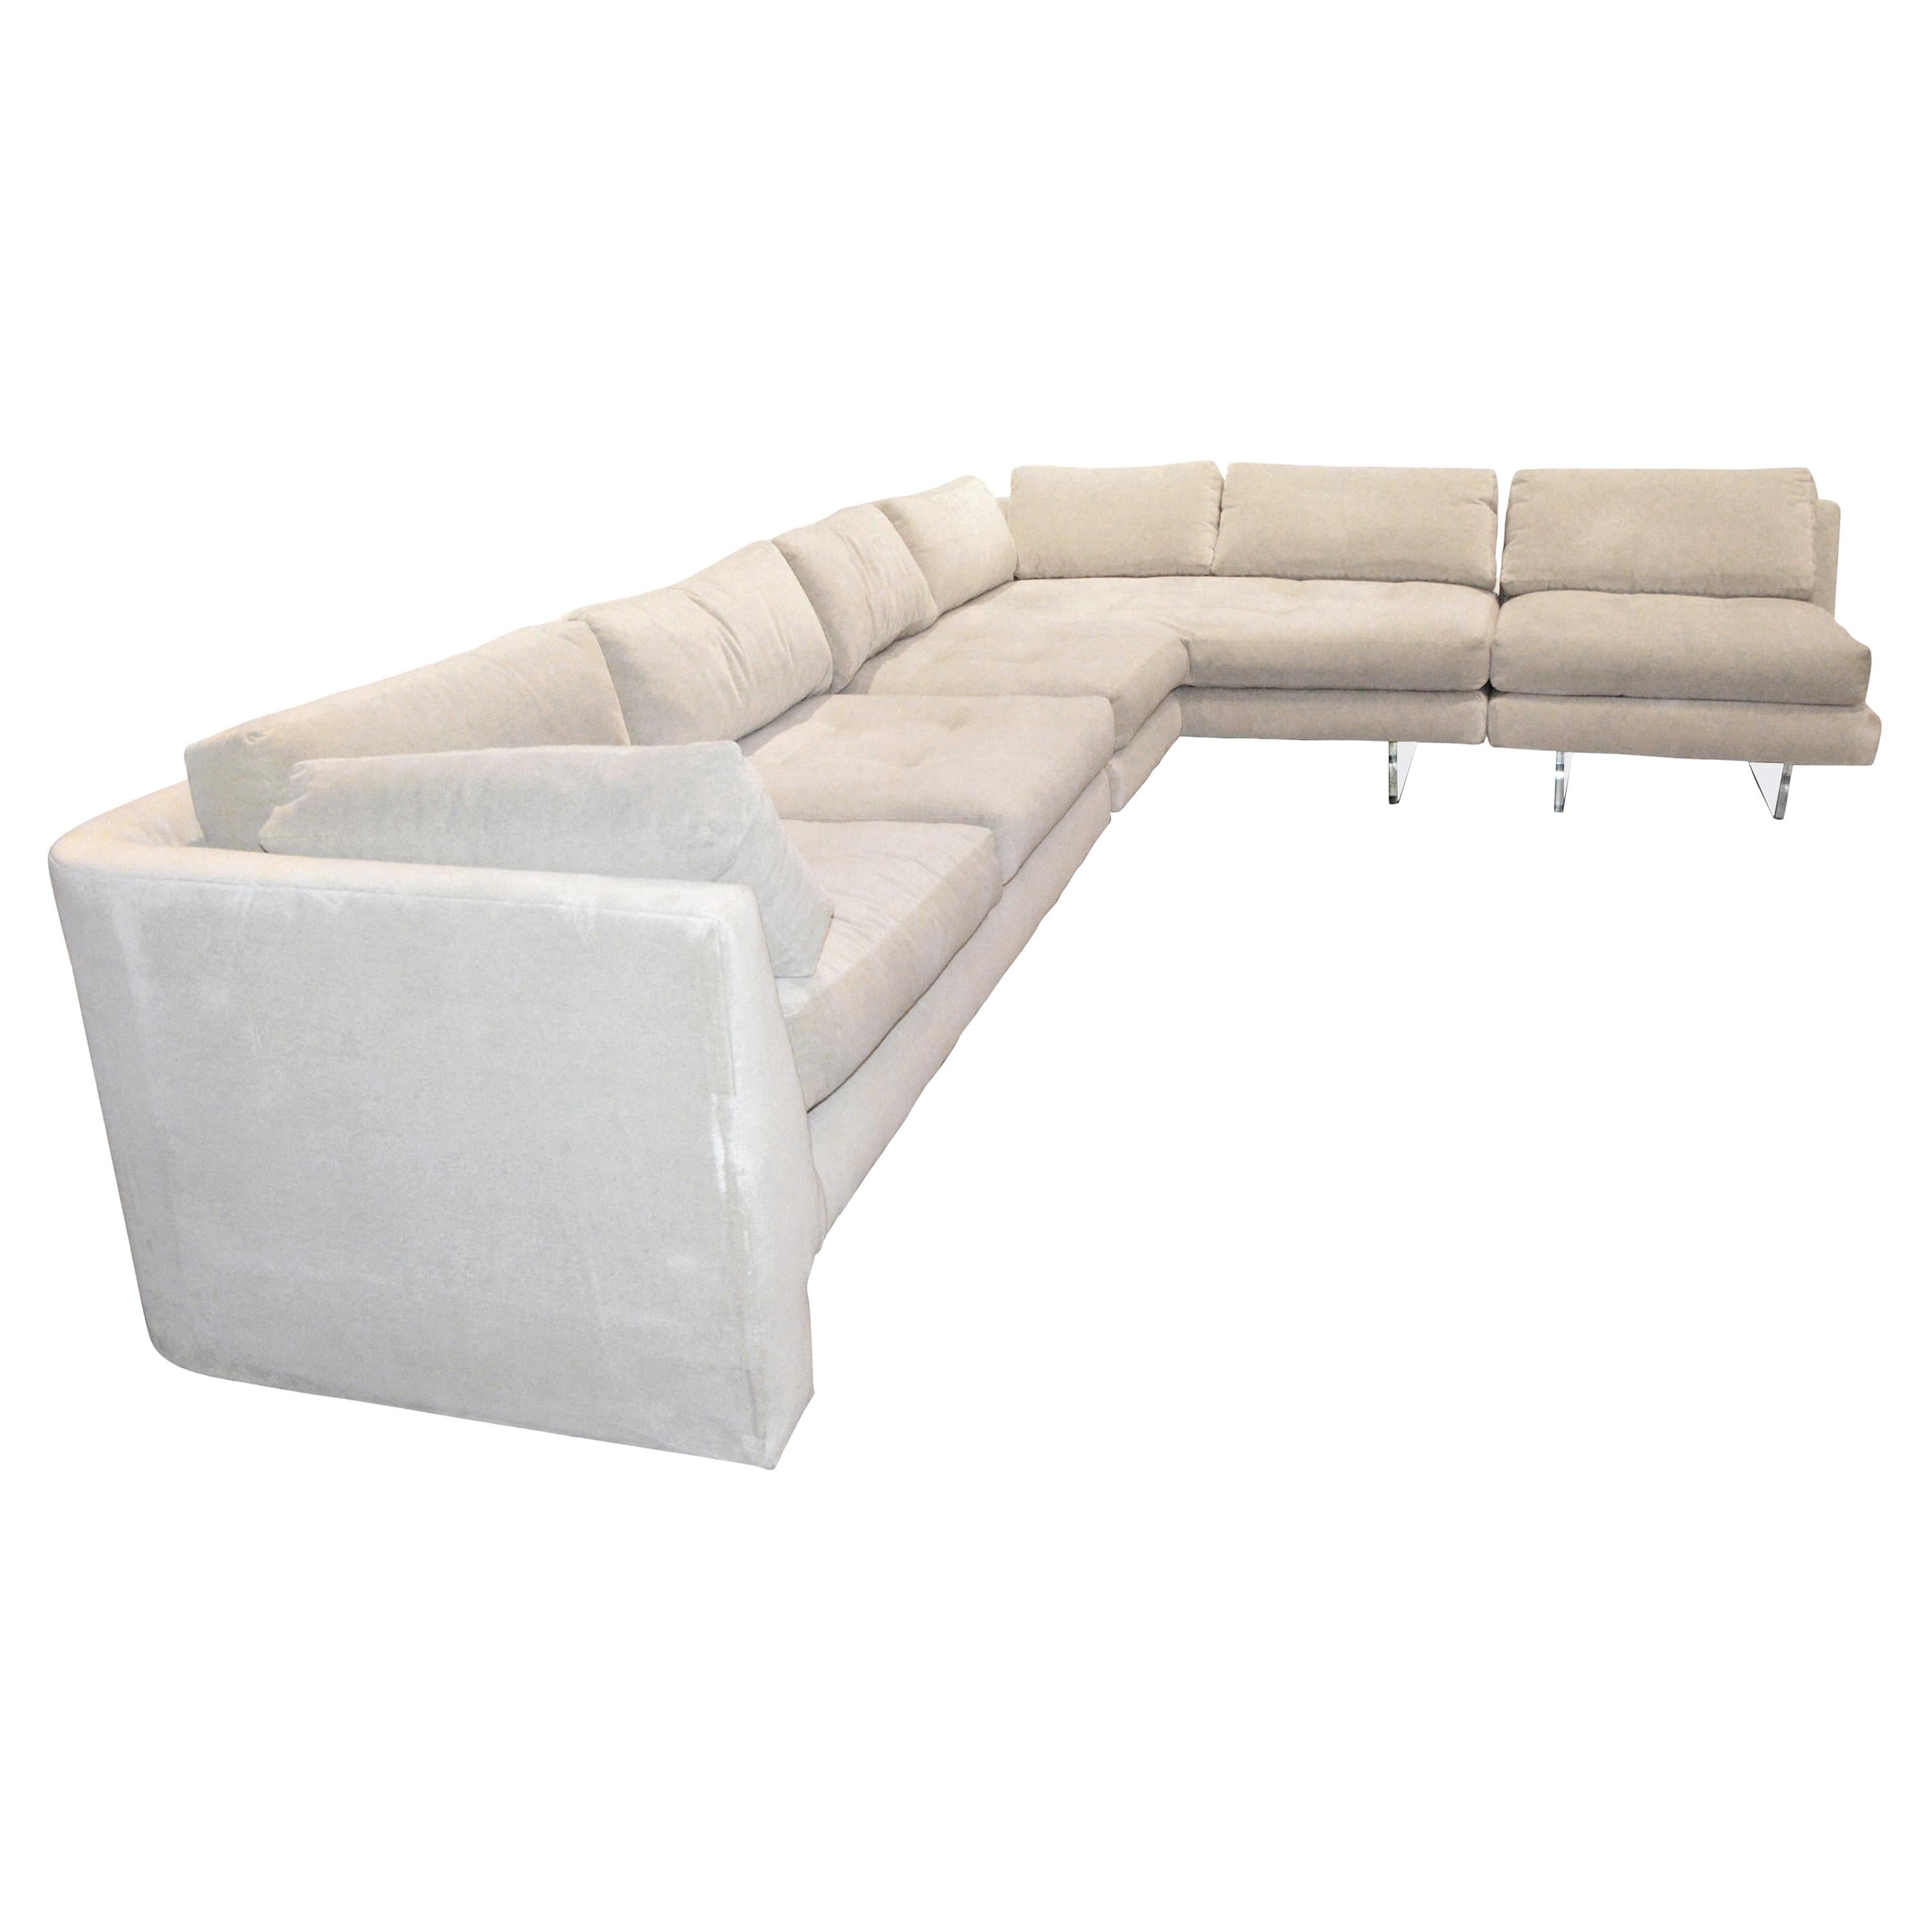 Kagan Ivory or Gray Flannel Button Tufted Three Section Omnibus Sectional Sofa For Sale